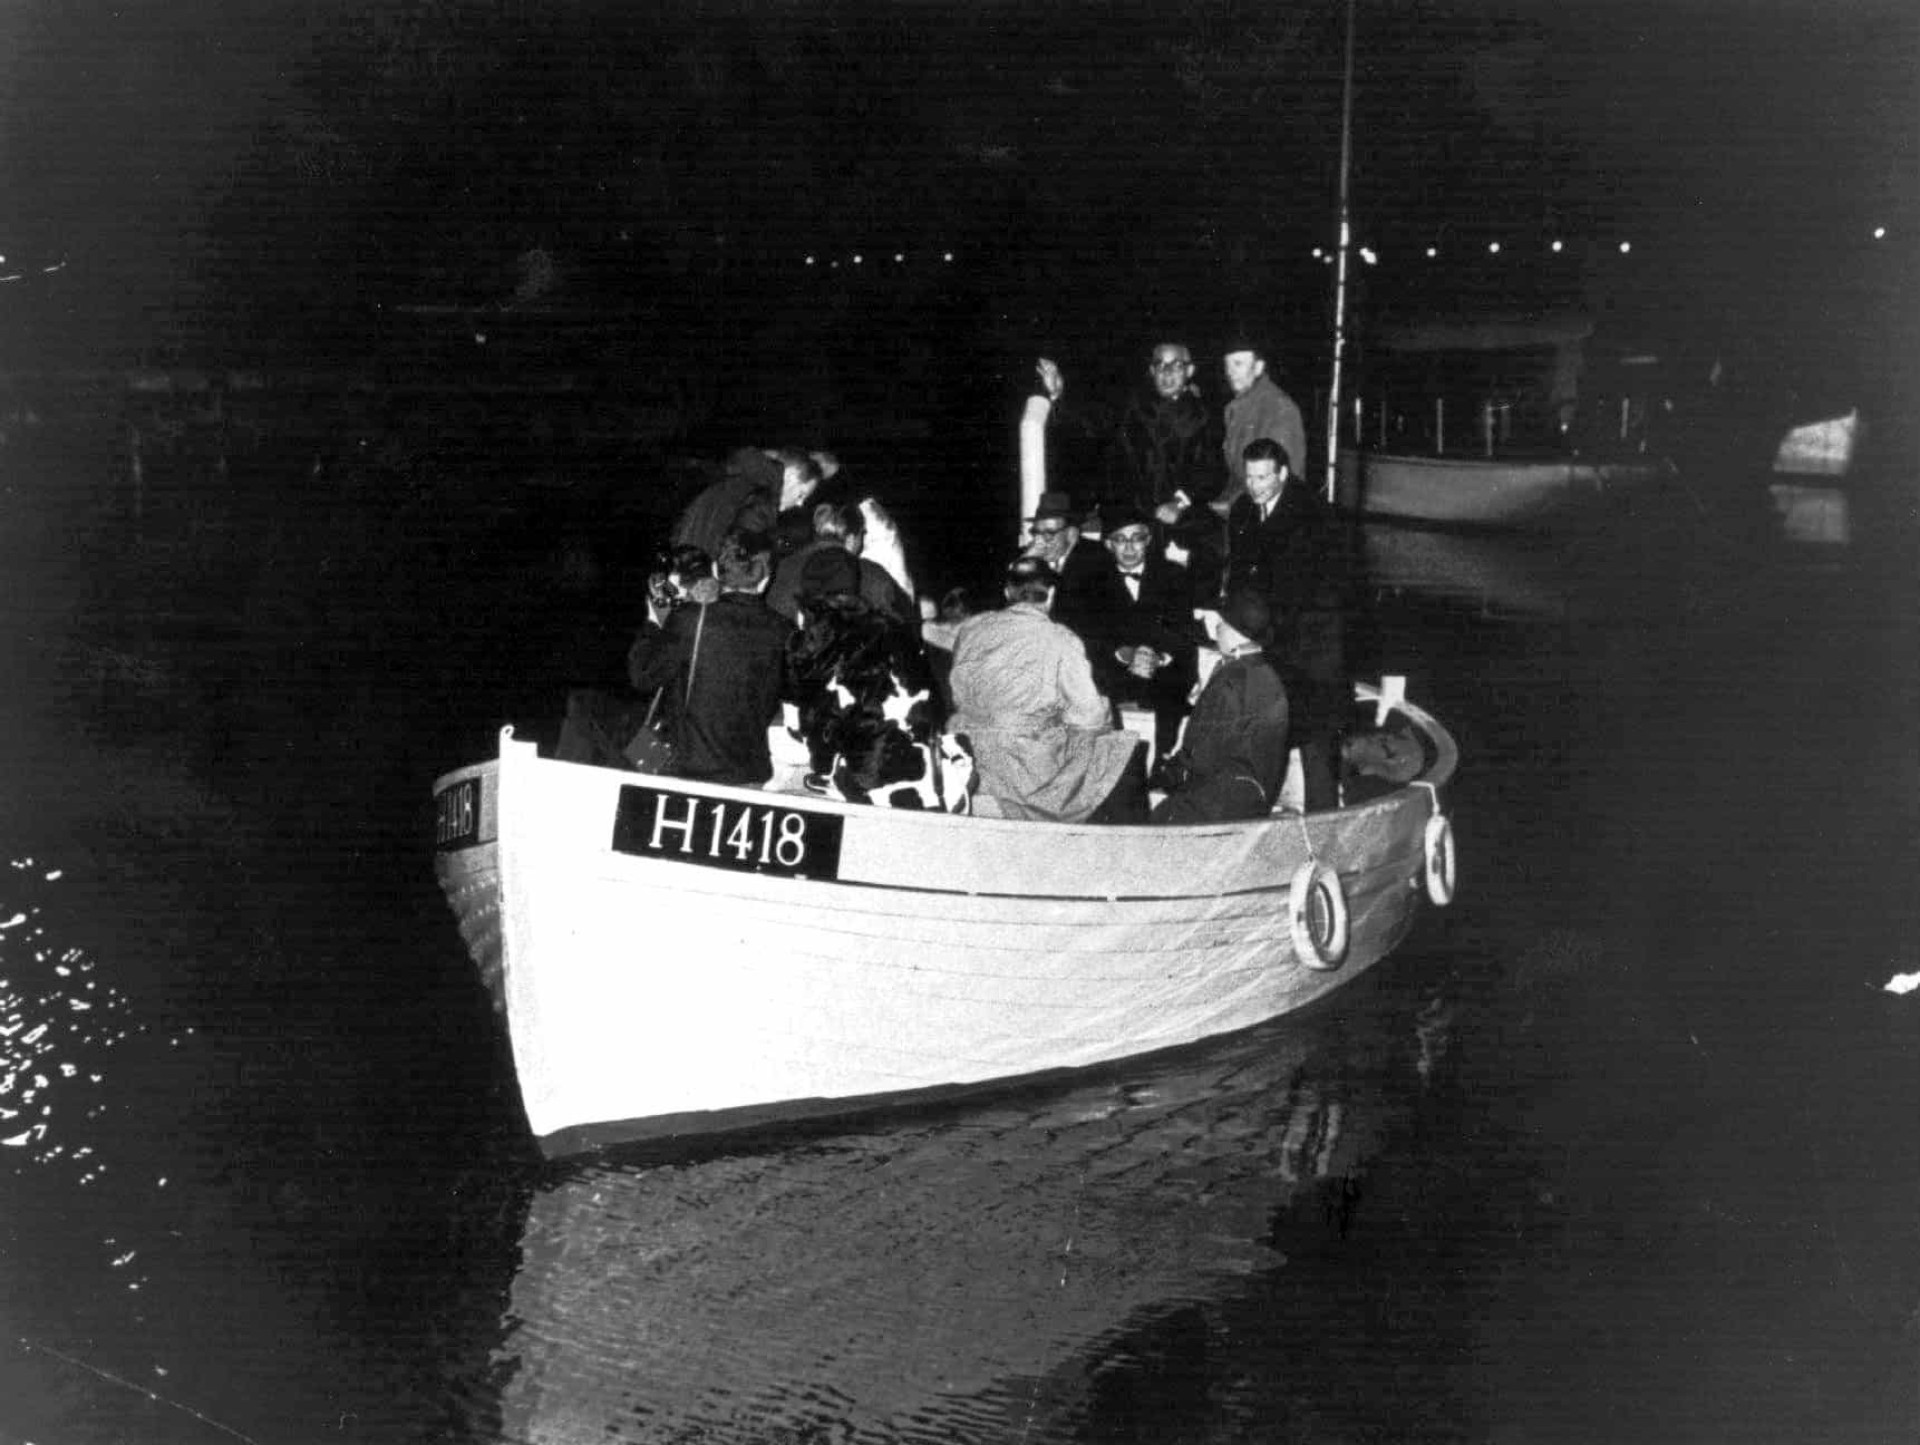 <p>The Gestapo intended to conduct searches in Jewish households on October 1 and transport all Danish Jews to concentration camps. However, the actual number of individuals gathered when soldiers forcibly entered homes nationwide was fewer than 300. Pictured are Danish Jews on their way to Sweden.</p><p><a href="https://www.msn.com/en-my/community/channel/vid-7xx8mnucu55yw63we9va2gwr7uihbxwc68fxqp25x6tg4ftibpra?cvid=94631541bc0f4f89bfd59158d696ad7e">Follow us and access great exclusive content every day</a></p>